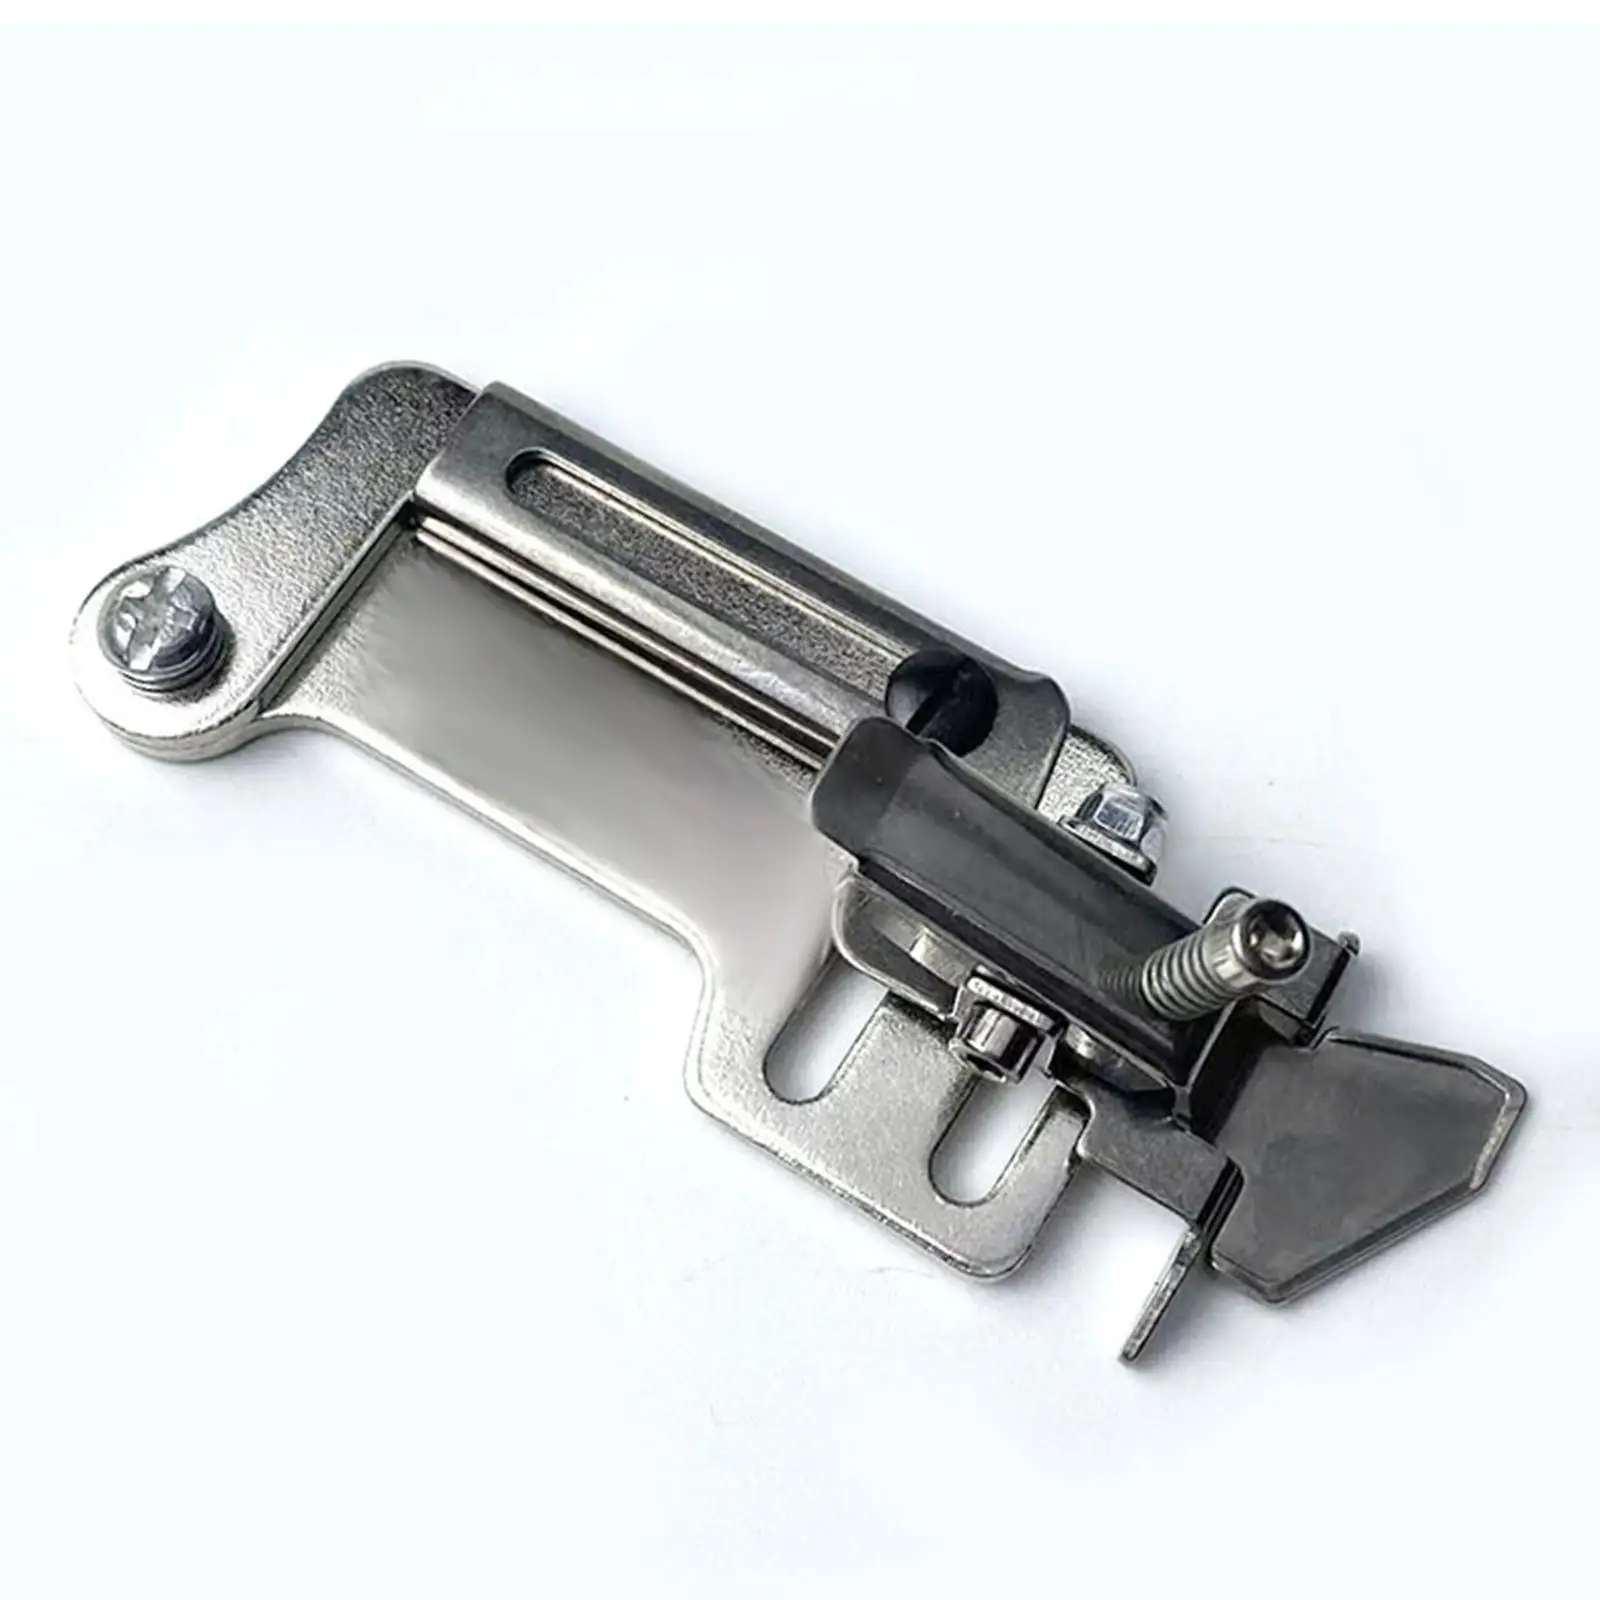 Industrial Sewing Machine Presser Foot Adjustable Edge Guide for Computer Pattern Machine Home Sewing Machine Quilting Stitching